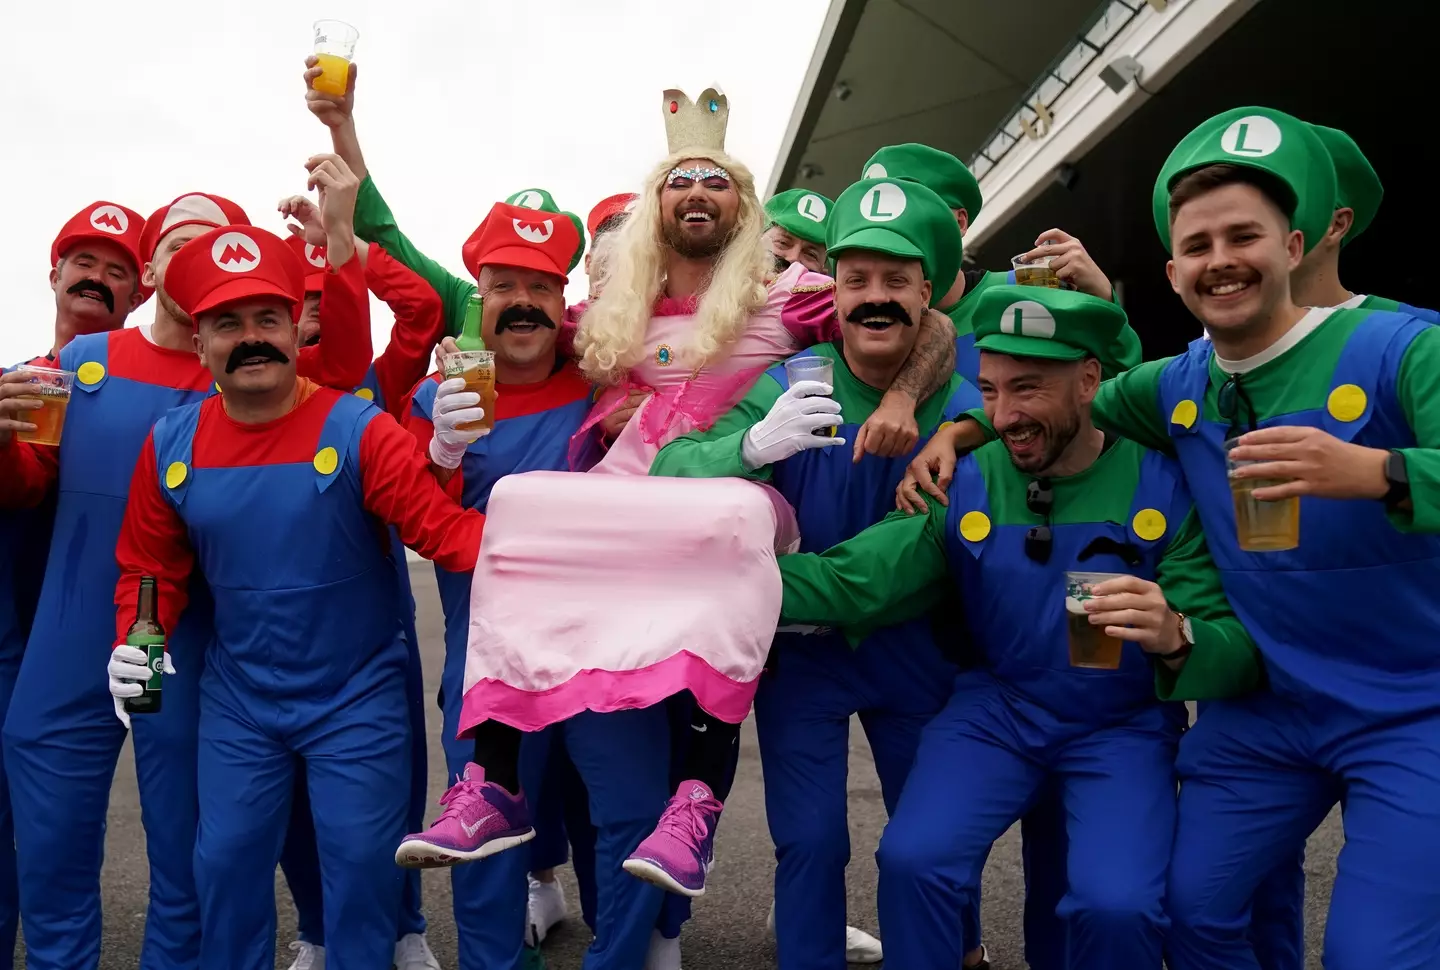 Fancy dress is a stag do classic. (Brian Lawless/PA Wire)